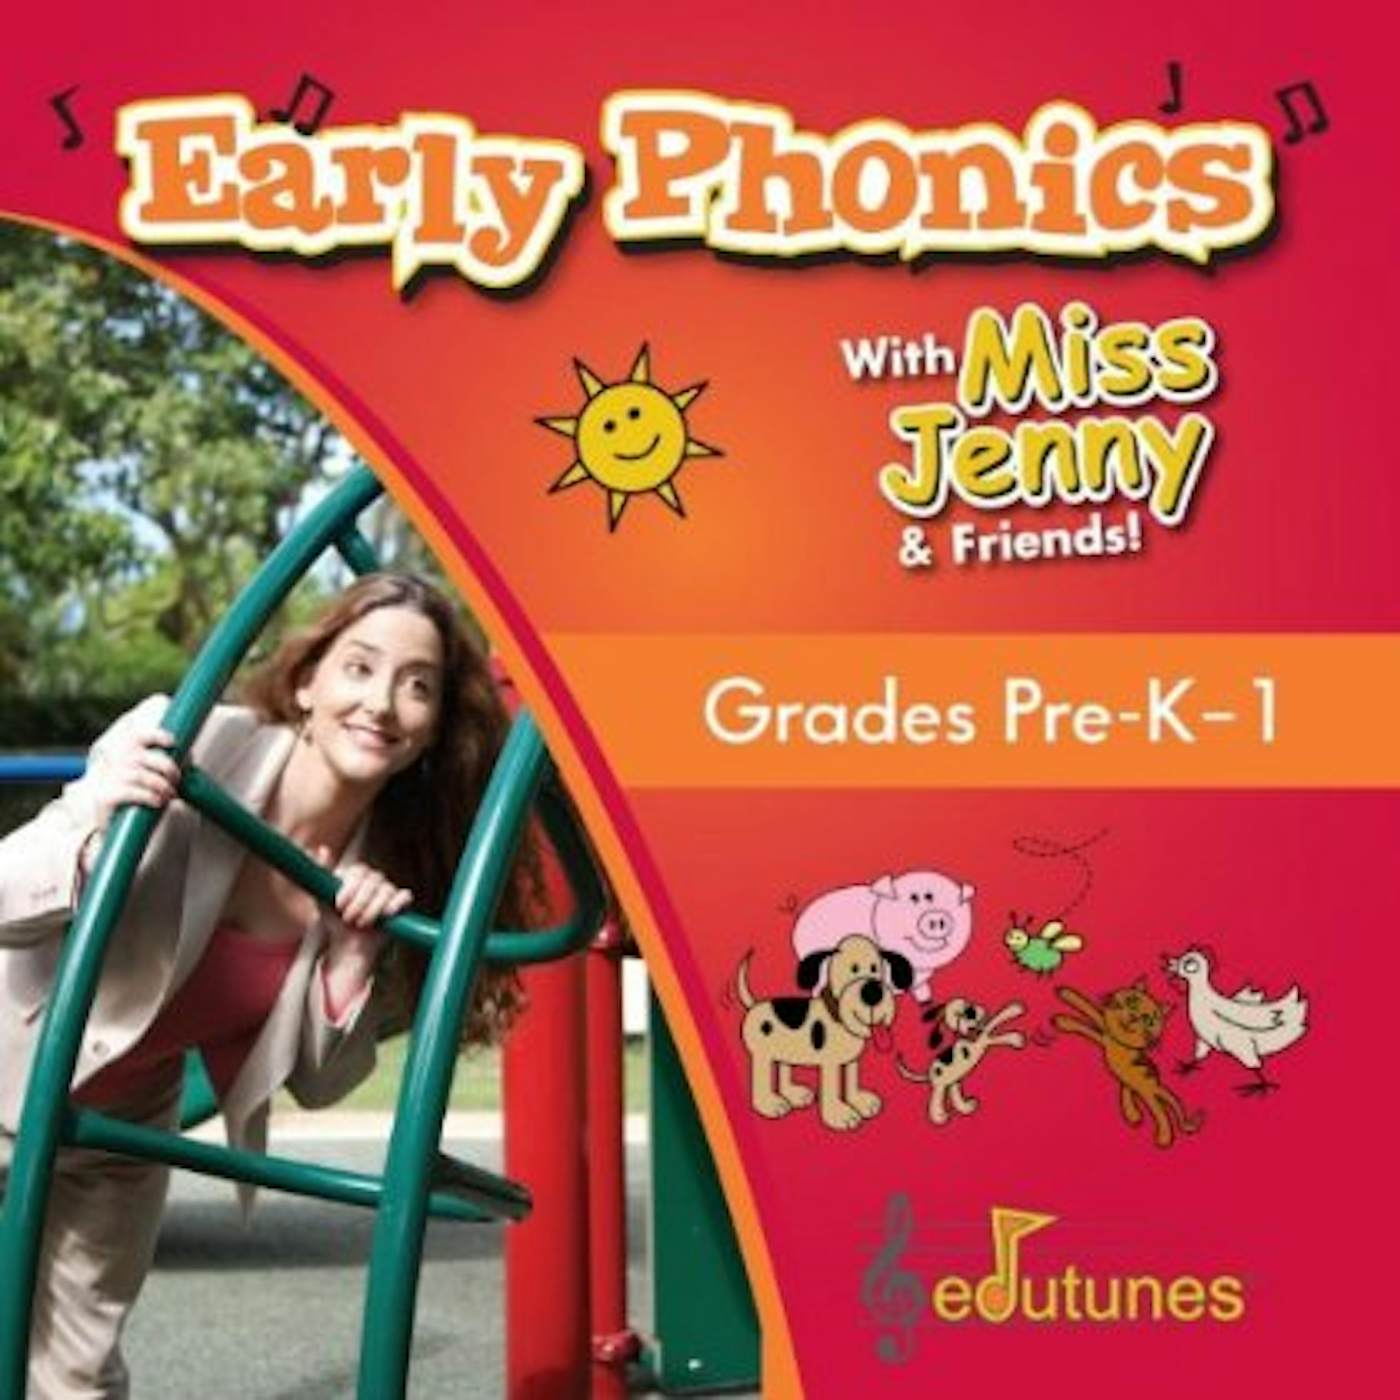 EARLY PHONICS WITH MISS JENNY & FRIENDS CD